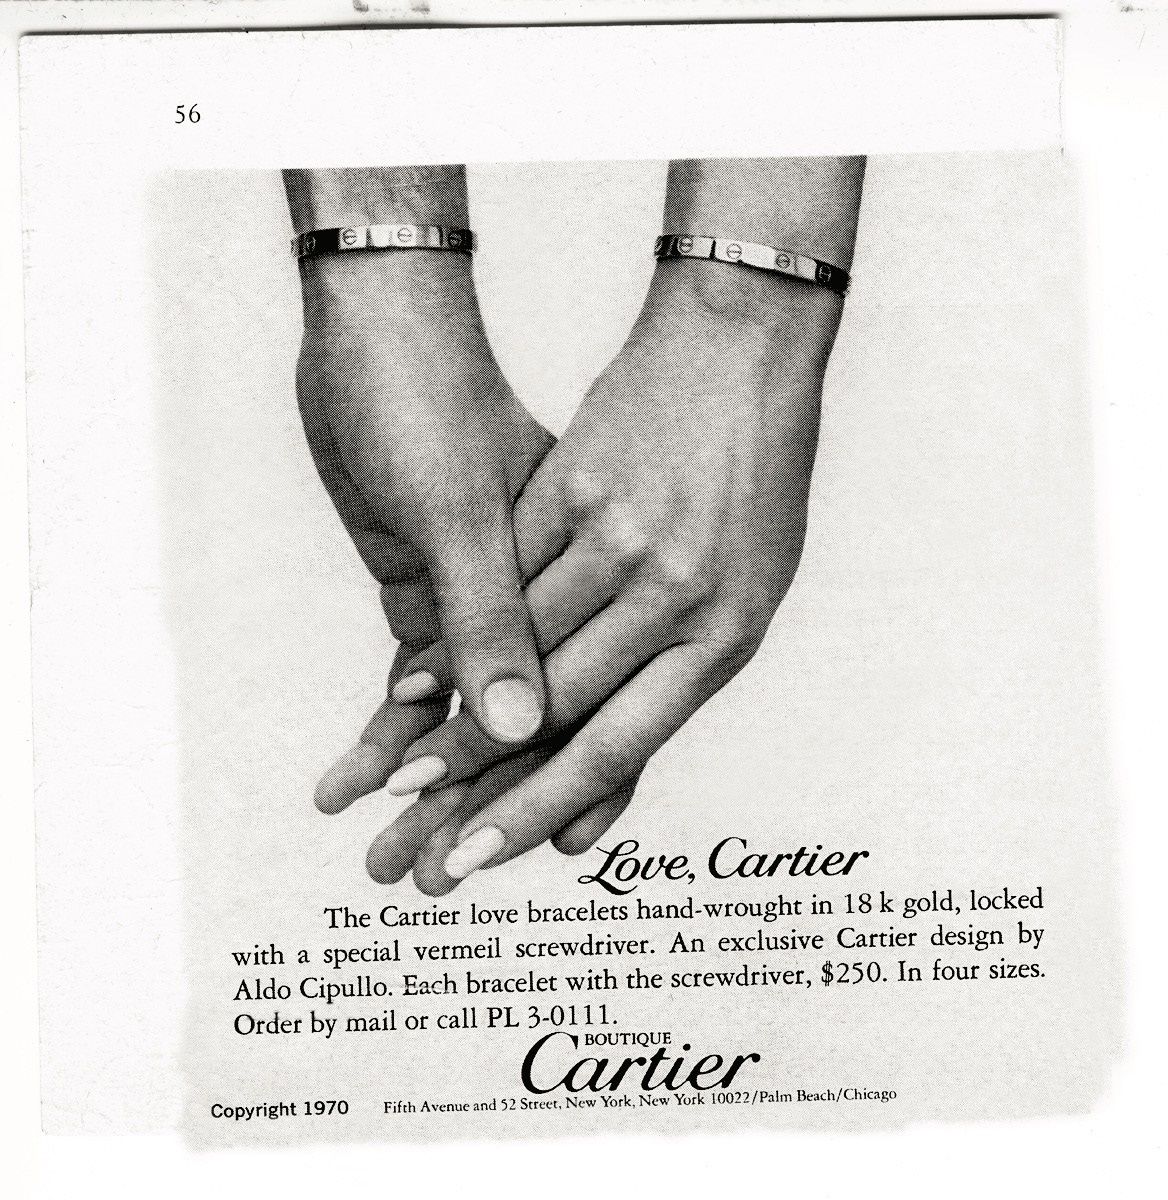 Cartier Love Bracelet Facts - 10 Things 